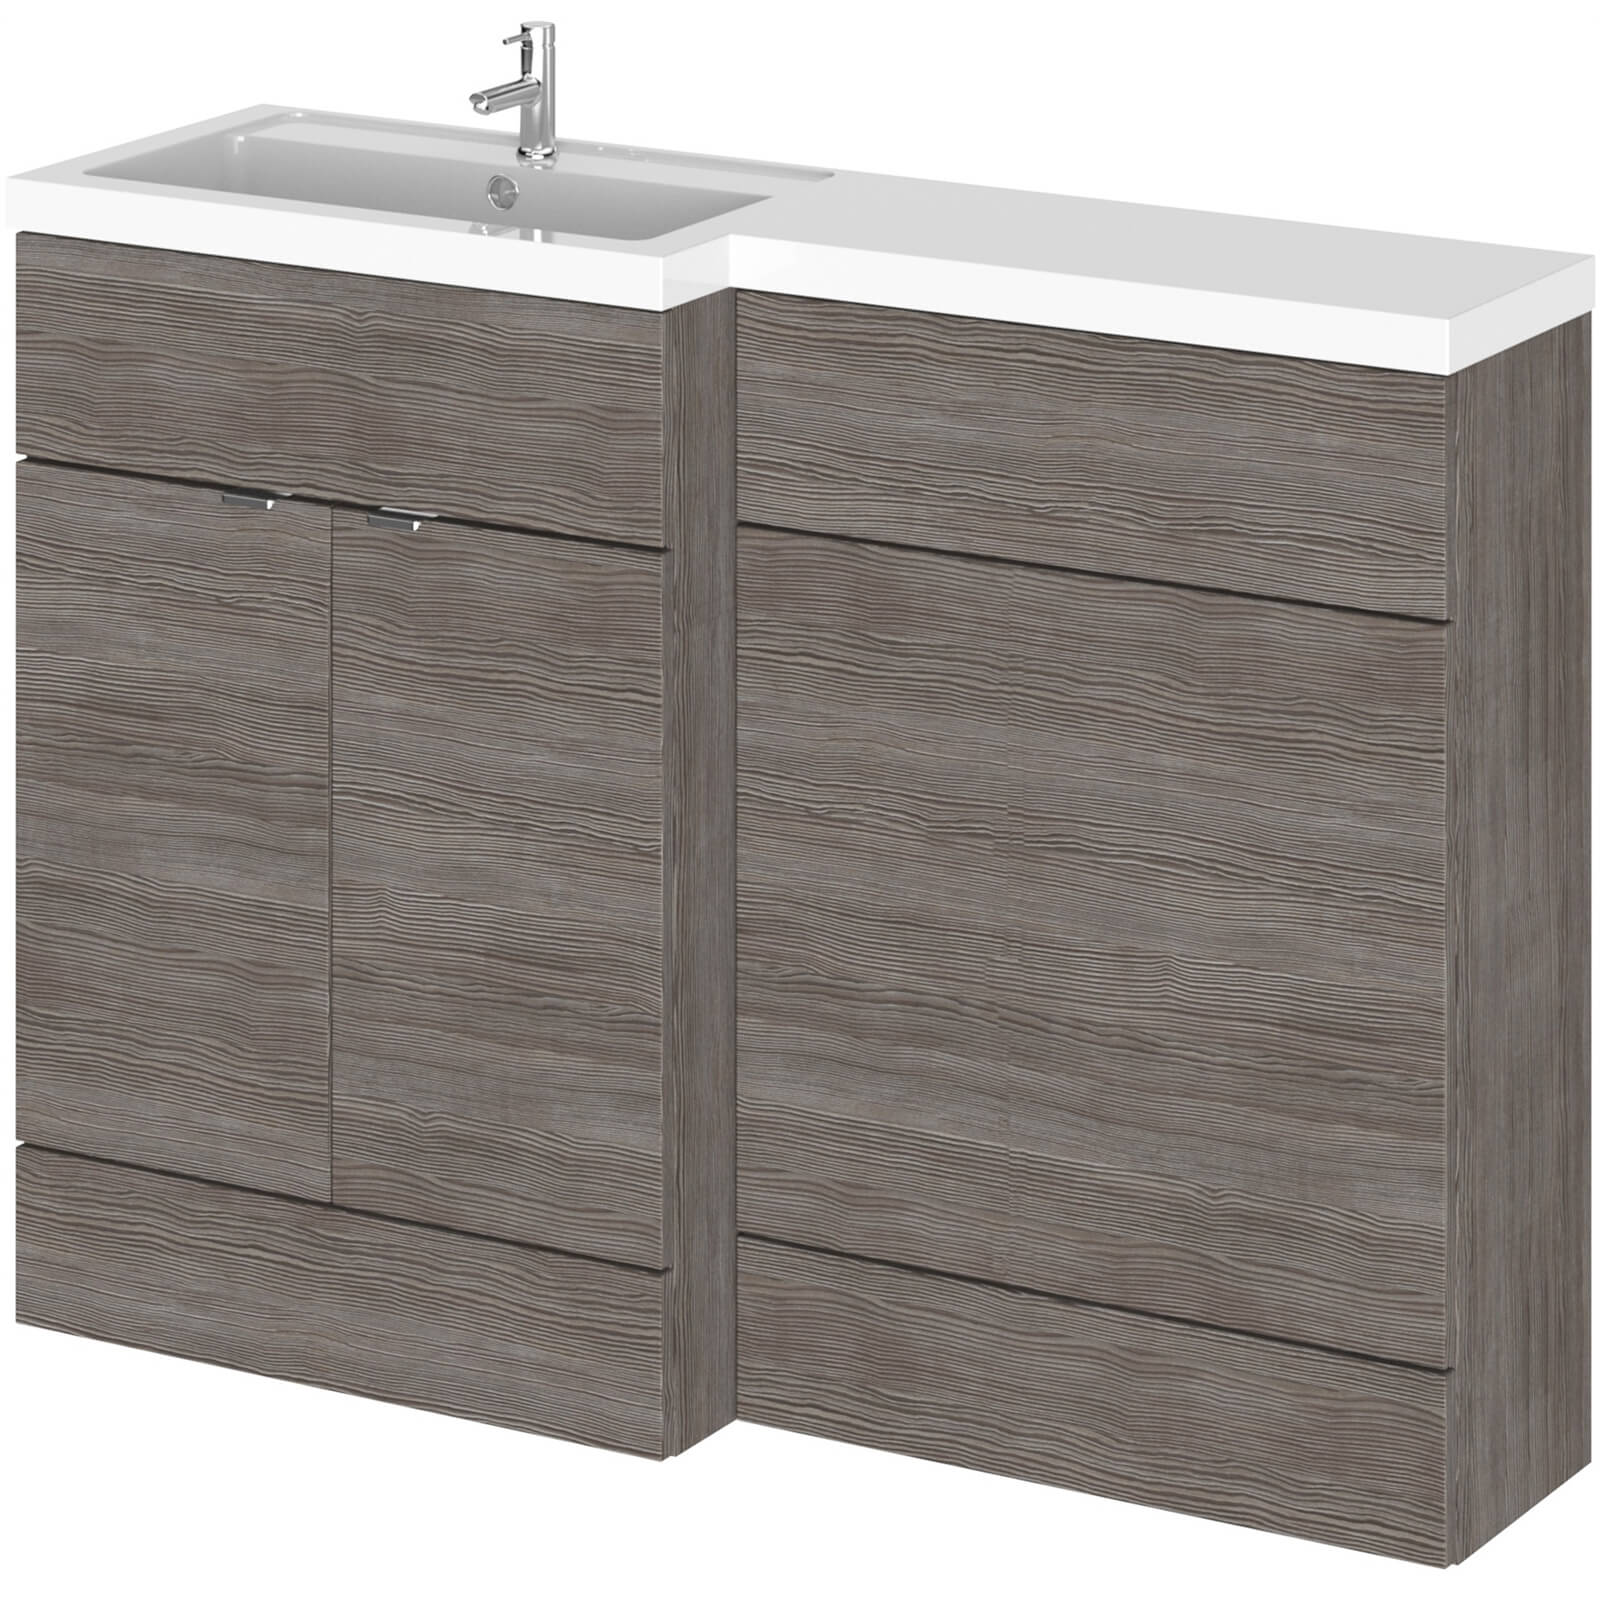 Photo of Balterley Dynamic 1200mm Left Hand Wc Combination Unit - Brown Grey Avola